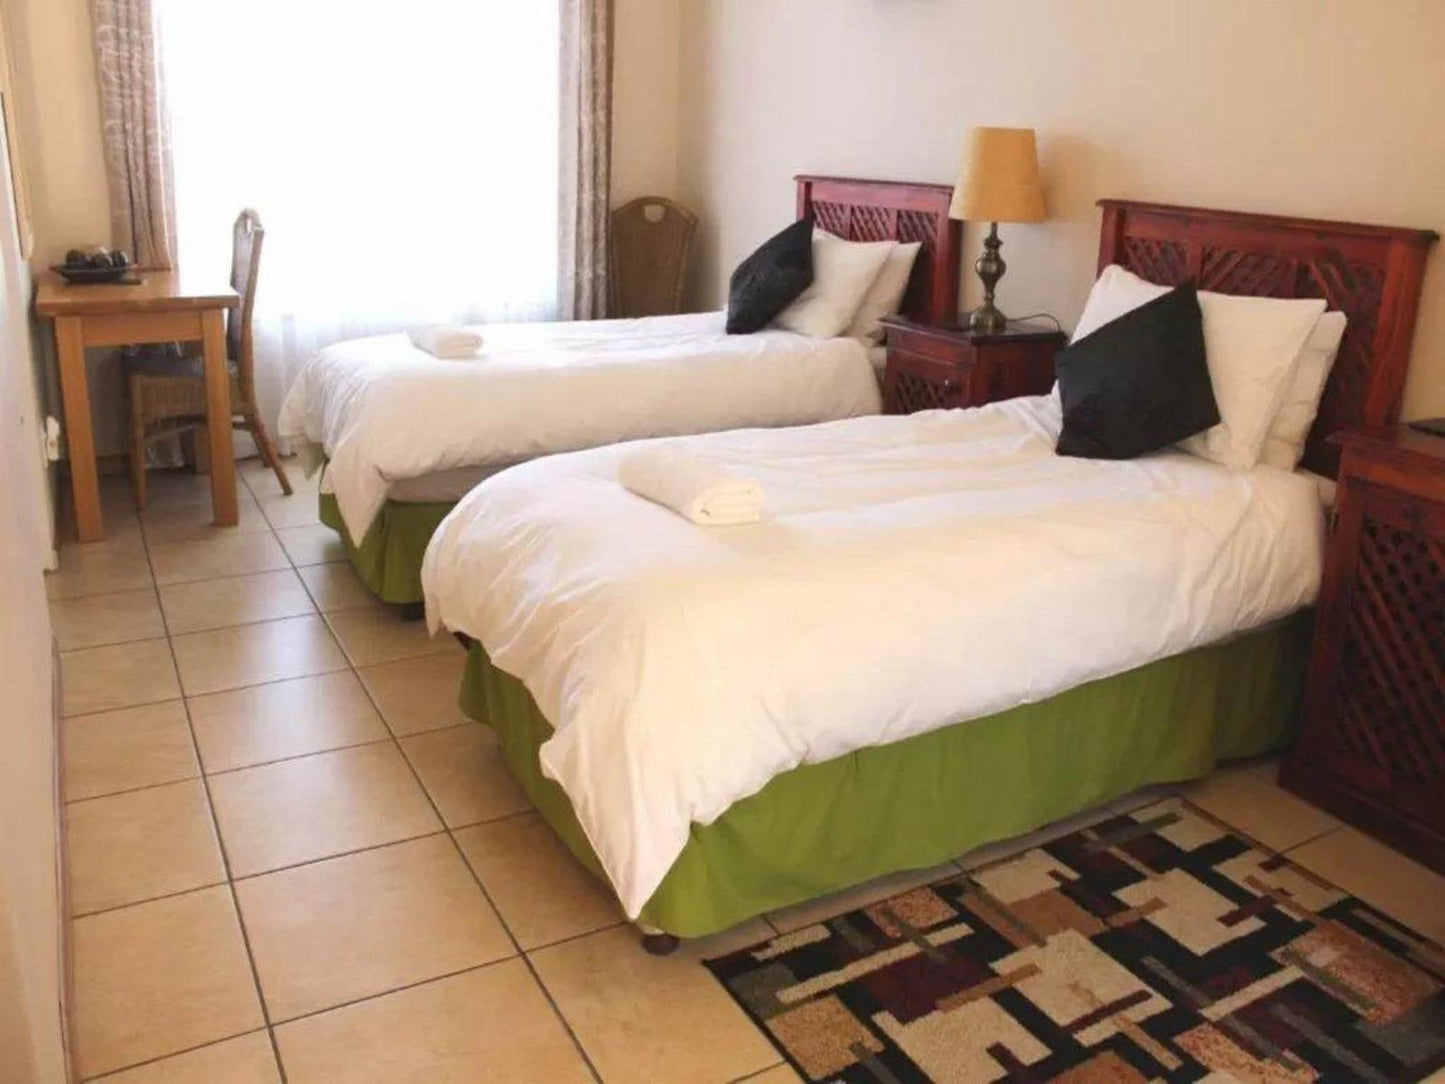 Unit 1 - Two-bedroom @ African Aquila Guest Lodge